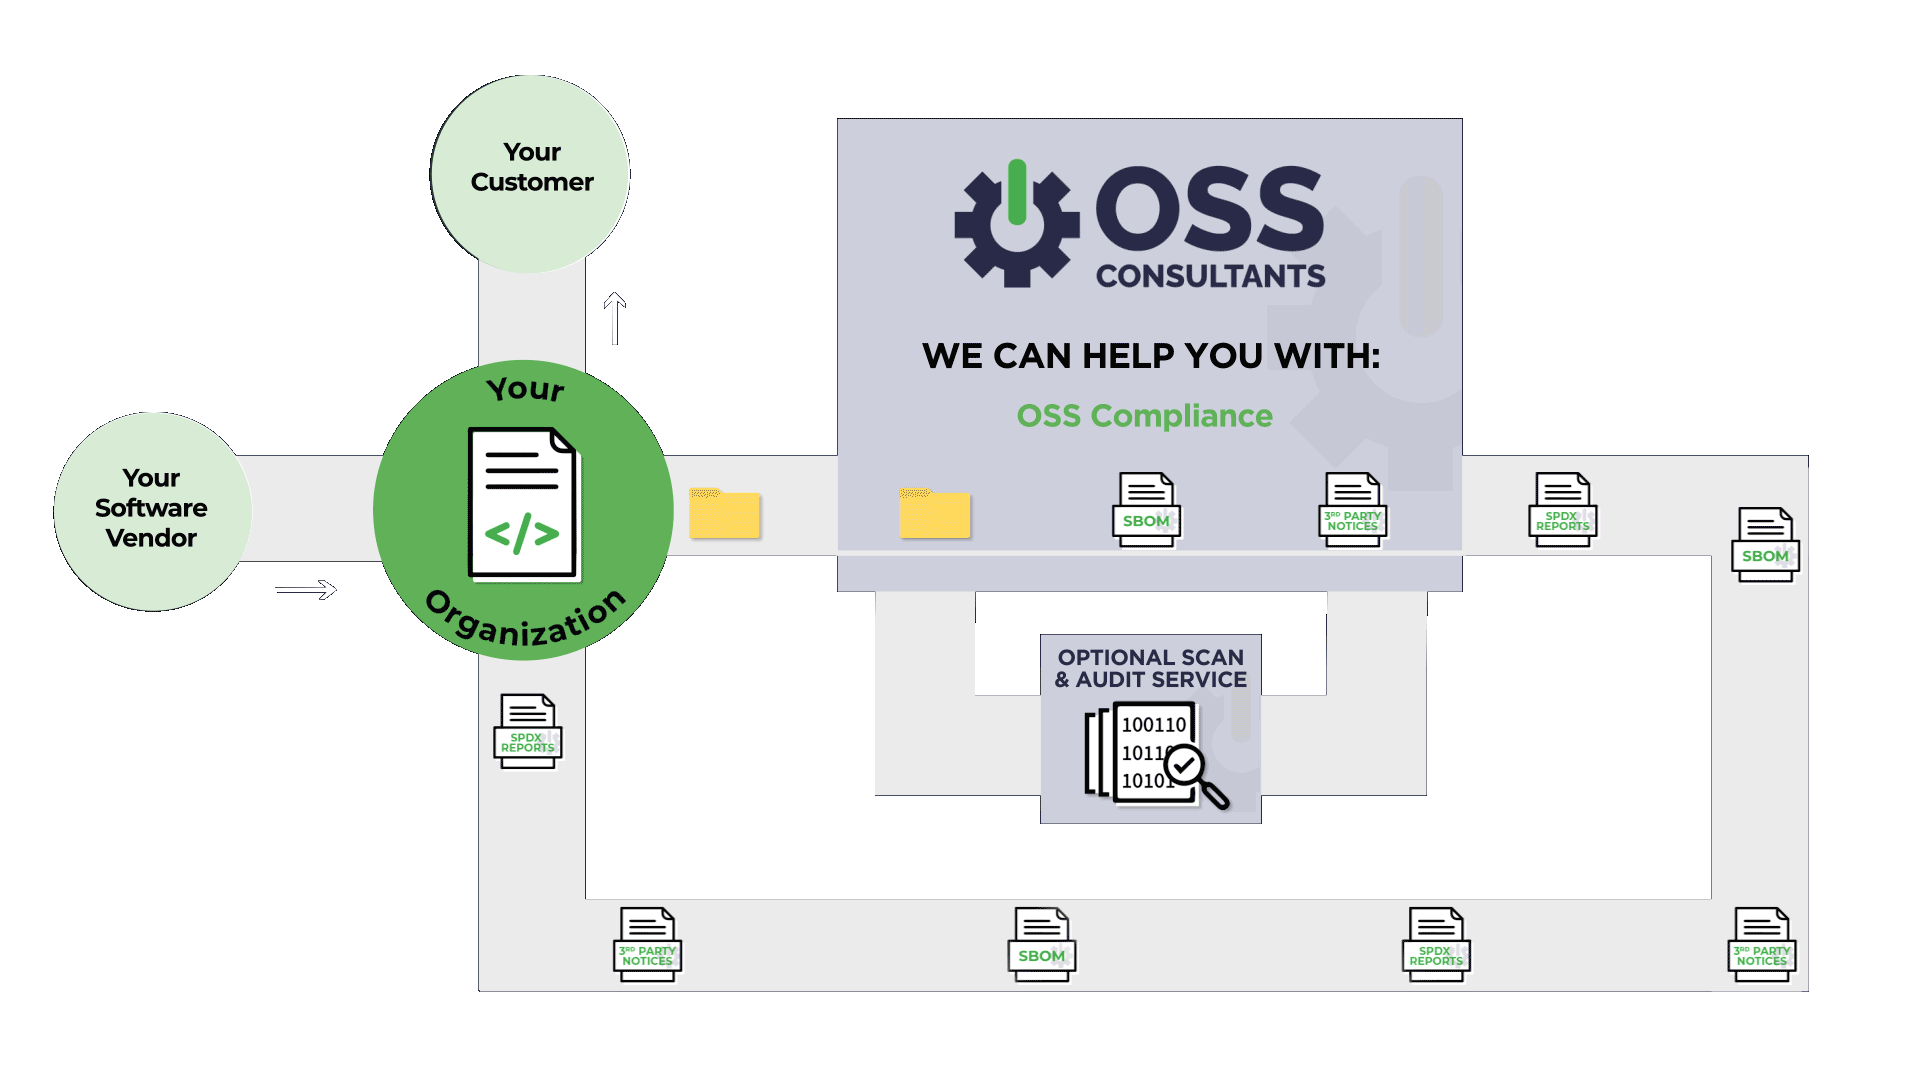 Managed OSPO Solutions - An outsourced, ready-to-implement solution tailored to meet your open source compliance needs.